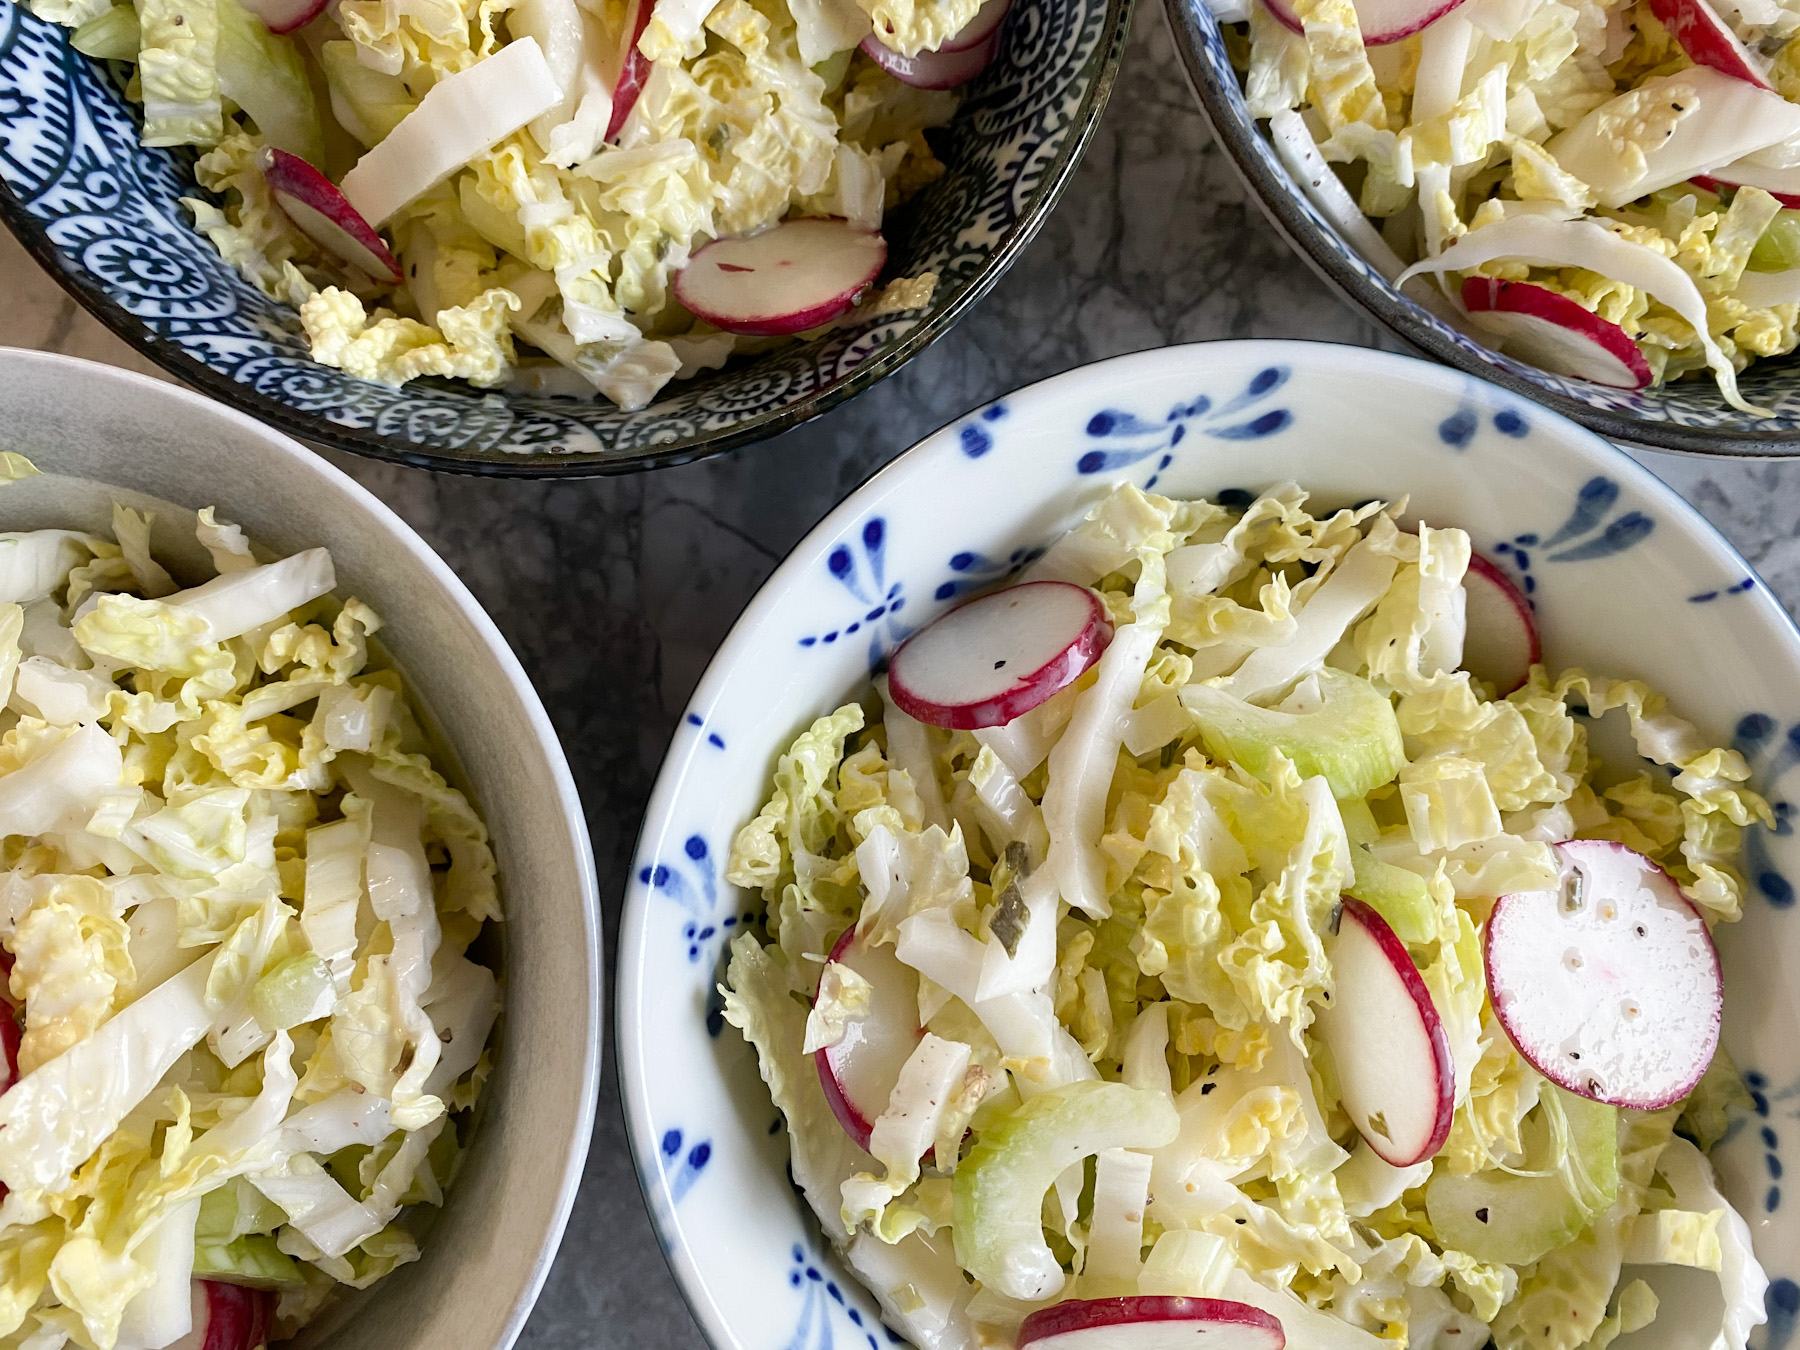 Napa Cabbage Salad (with Buttermilk Dressing)